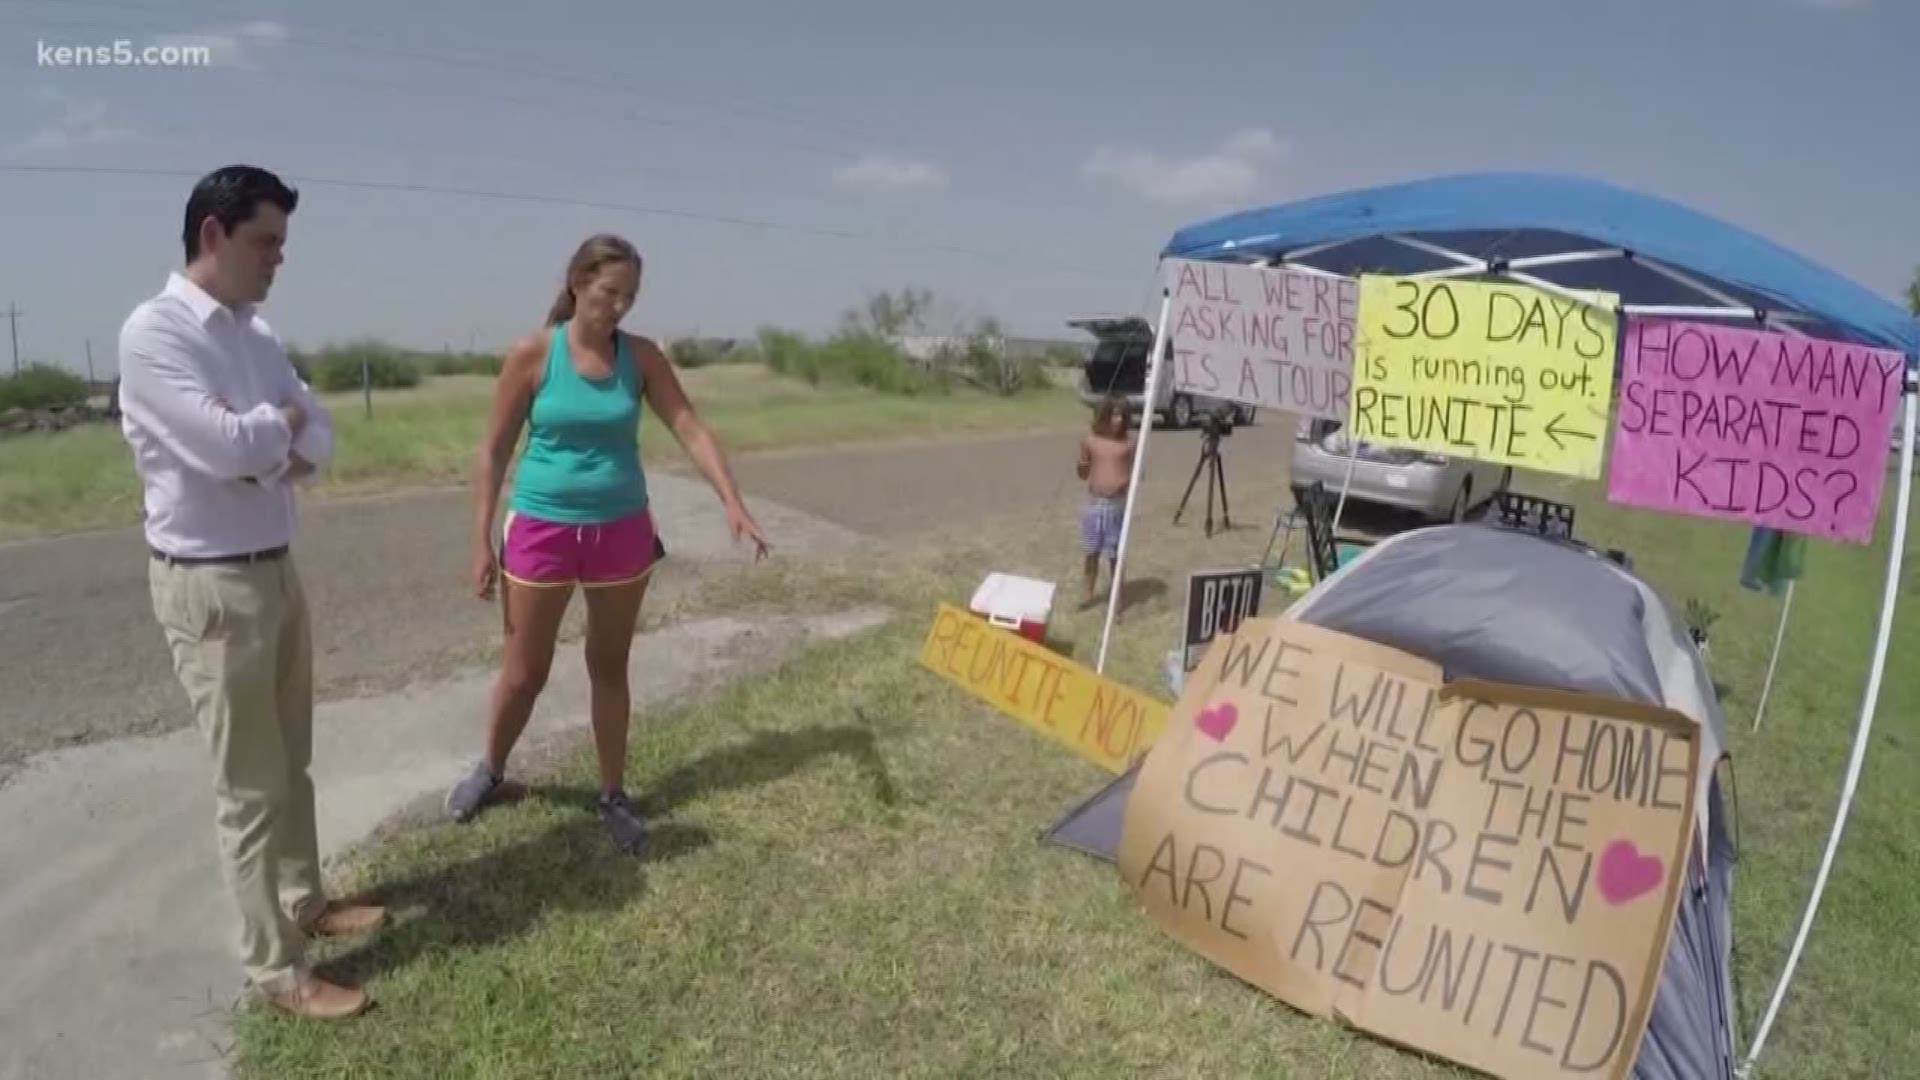 A New York family is camping outside a Texas border shelter in protest until migrant children are reunited with their parents.